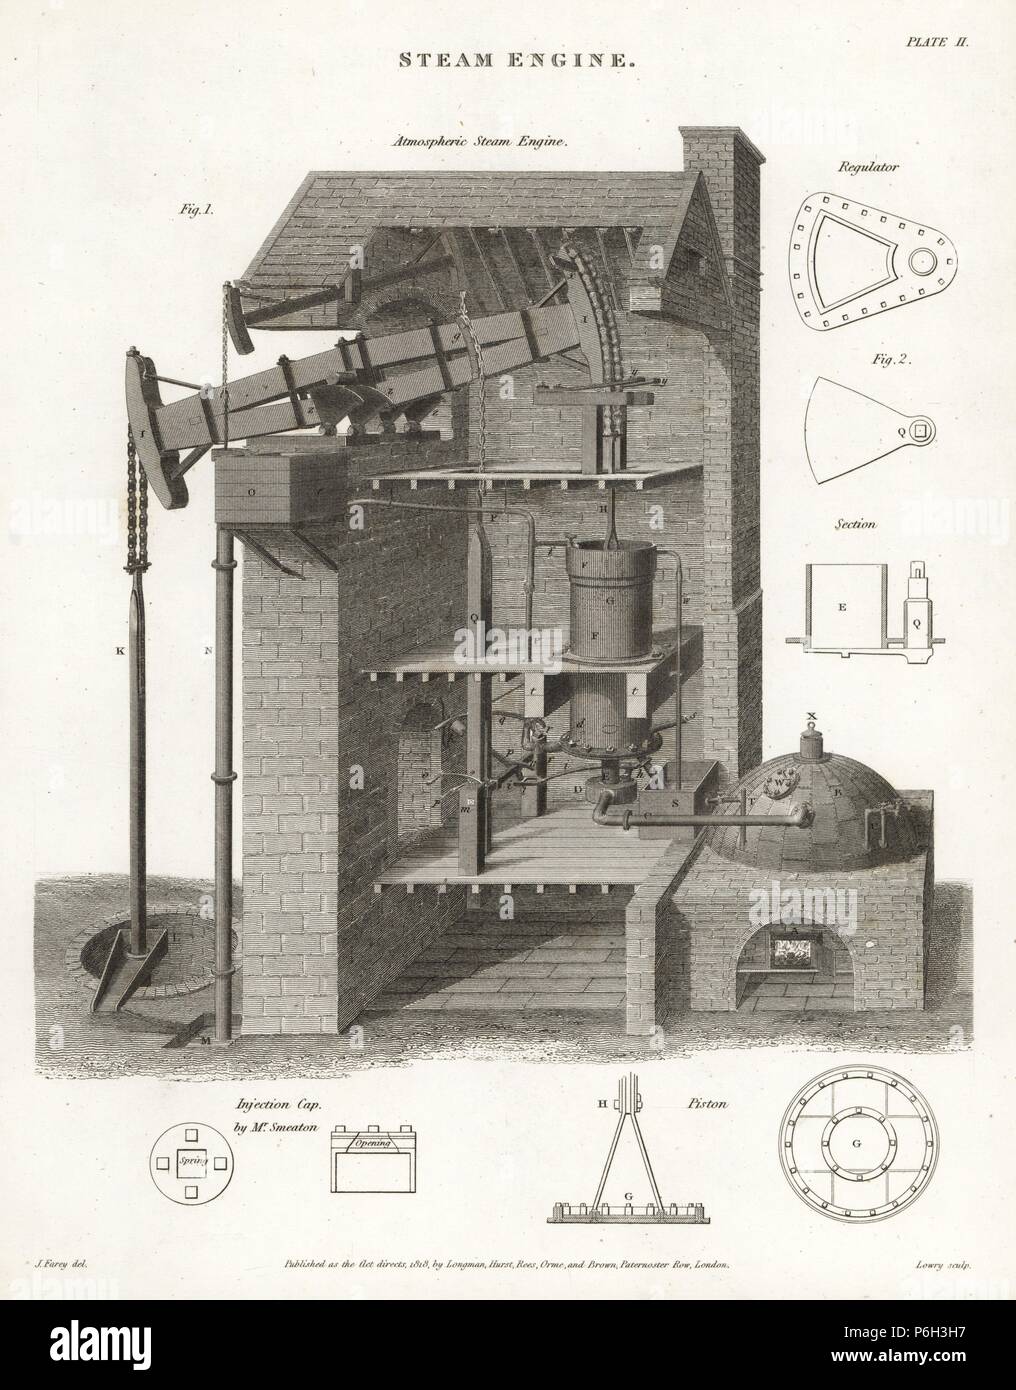 Atmospheric steam engine, elevation, 19th century. With Mr. John Smeaton's injection cap. Copperplate engraving by Wilson Lowry after an Illustration by J. Farey from Abraham Rees' 'Cyclopedia or Universal Dictionary,' London, 1818. Stock Photo